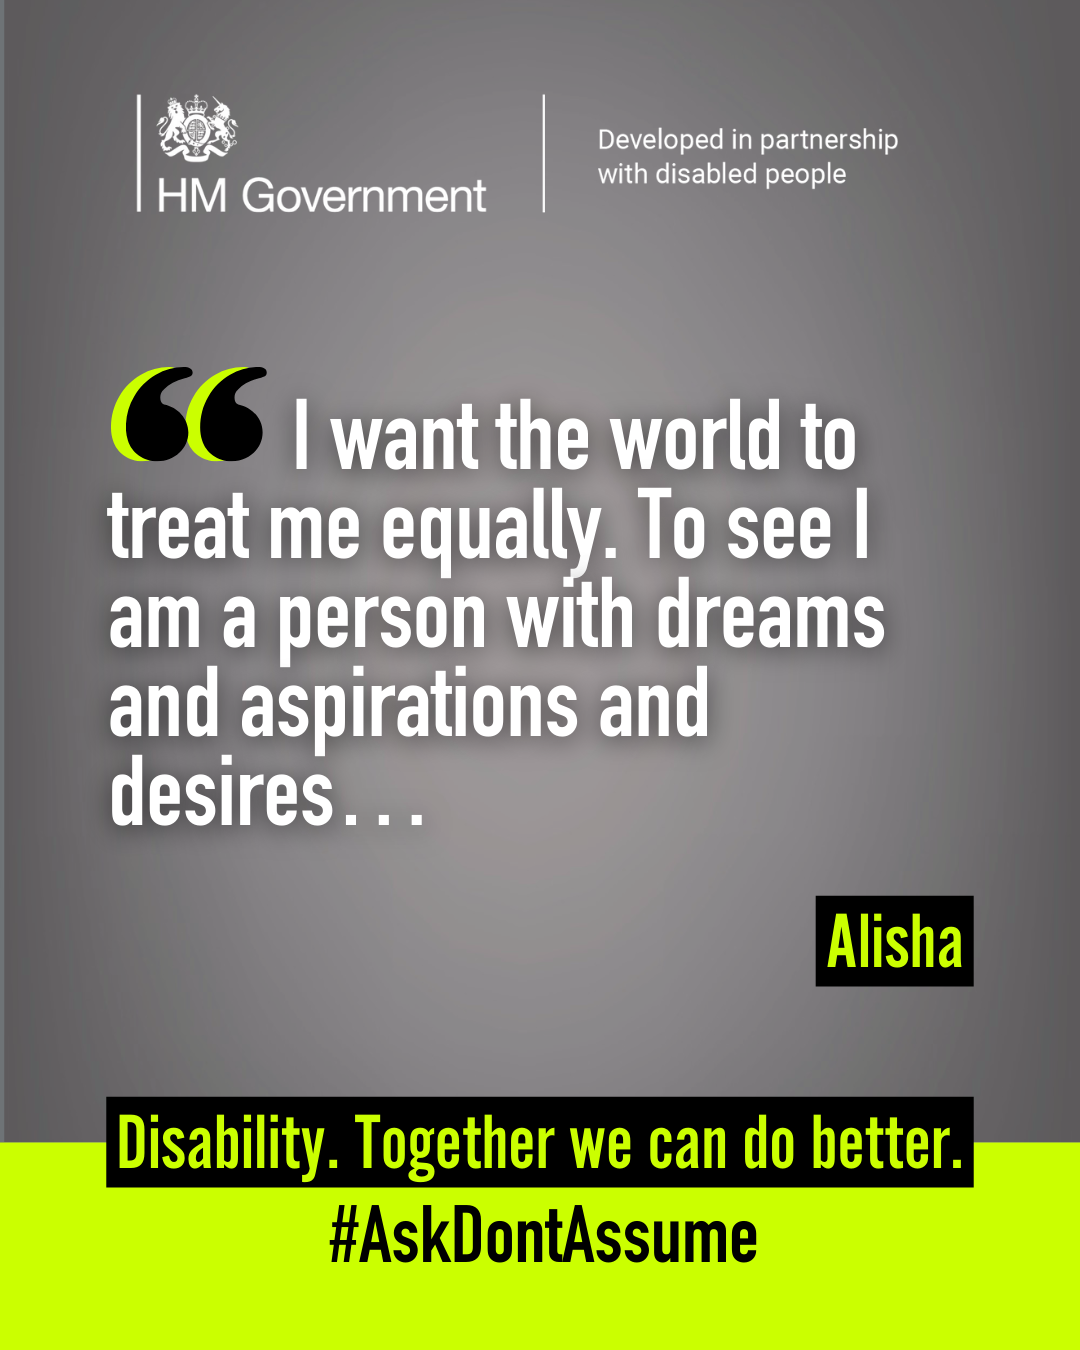 Dark grey portrait graphic with the HM Government logo and “Developed in partnership with disabled people” at the top. A quote from Alisha reads: “I want the world to treat me equally. To see I am a person with dreams and aspirations and desires”. At the bottom of the graphic it reads: “Disability. Together we can do better. #AskDontAssume”